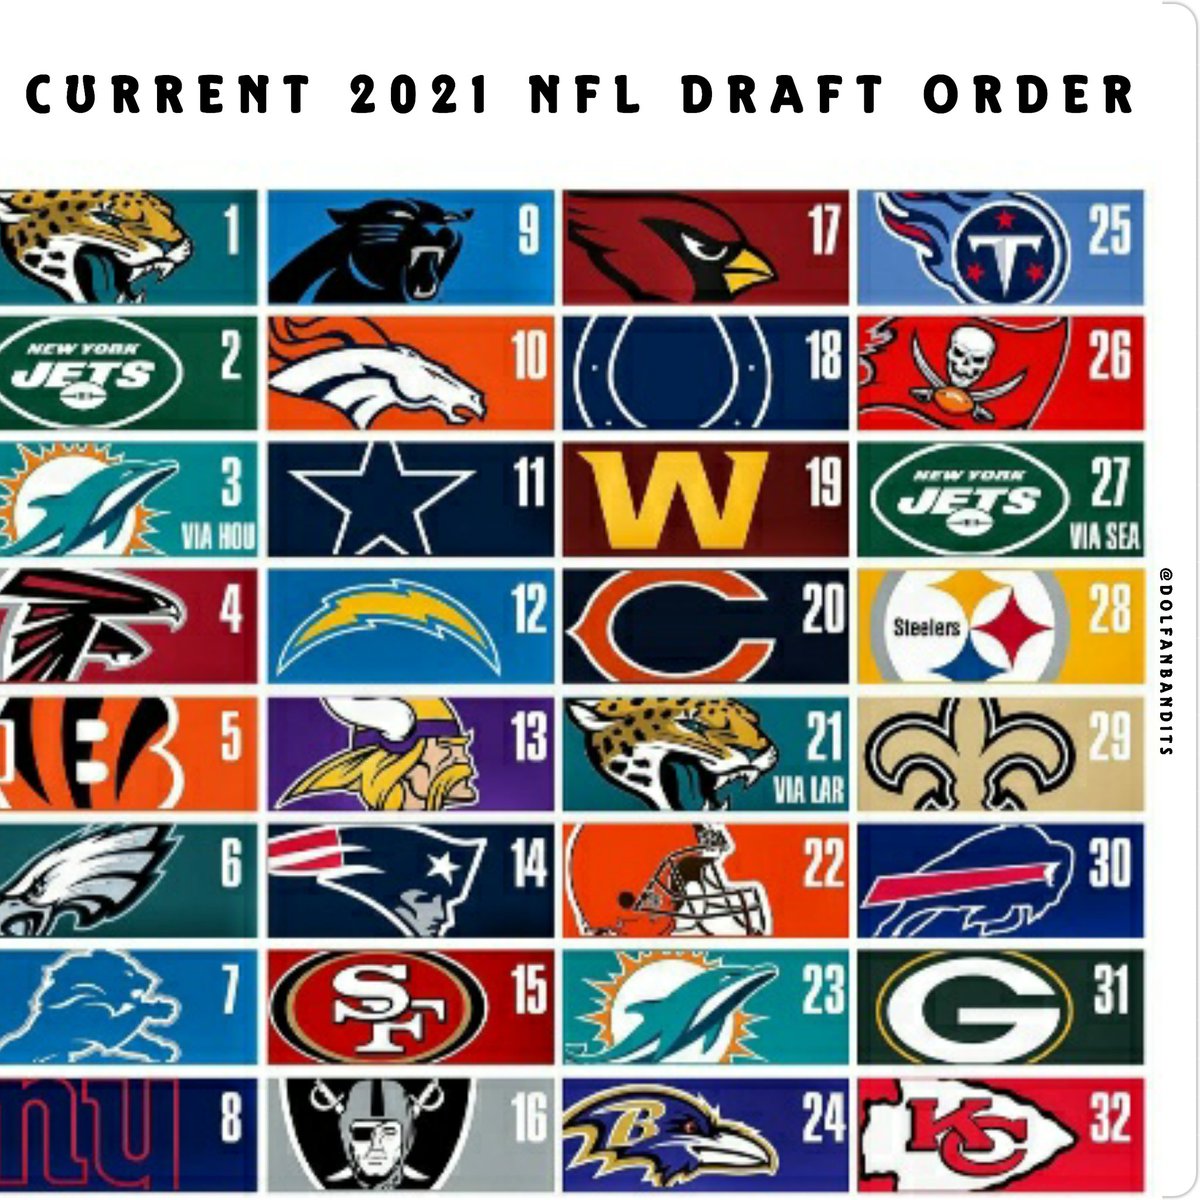 Fins Bandits On Twitter 2021 Updated Nfl Draft Order Finsup Miami Dolphins Fins4life